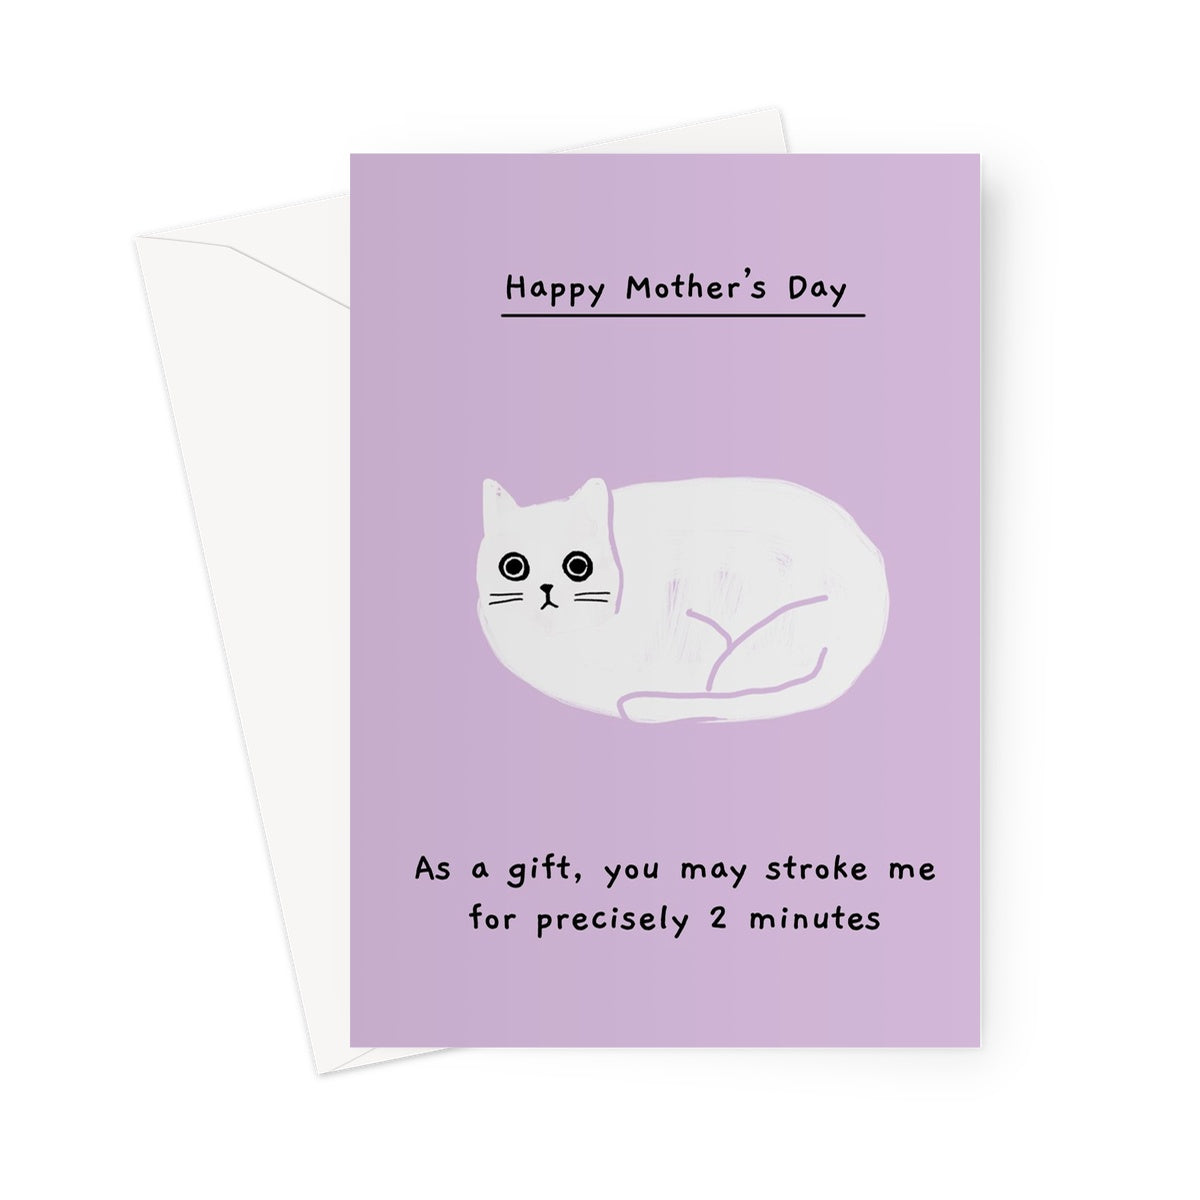 You May Stroke Me for Precisely 2 Minutes | Mother's Day Card